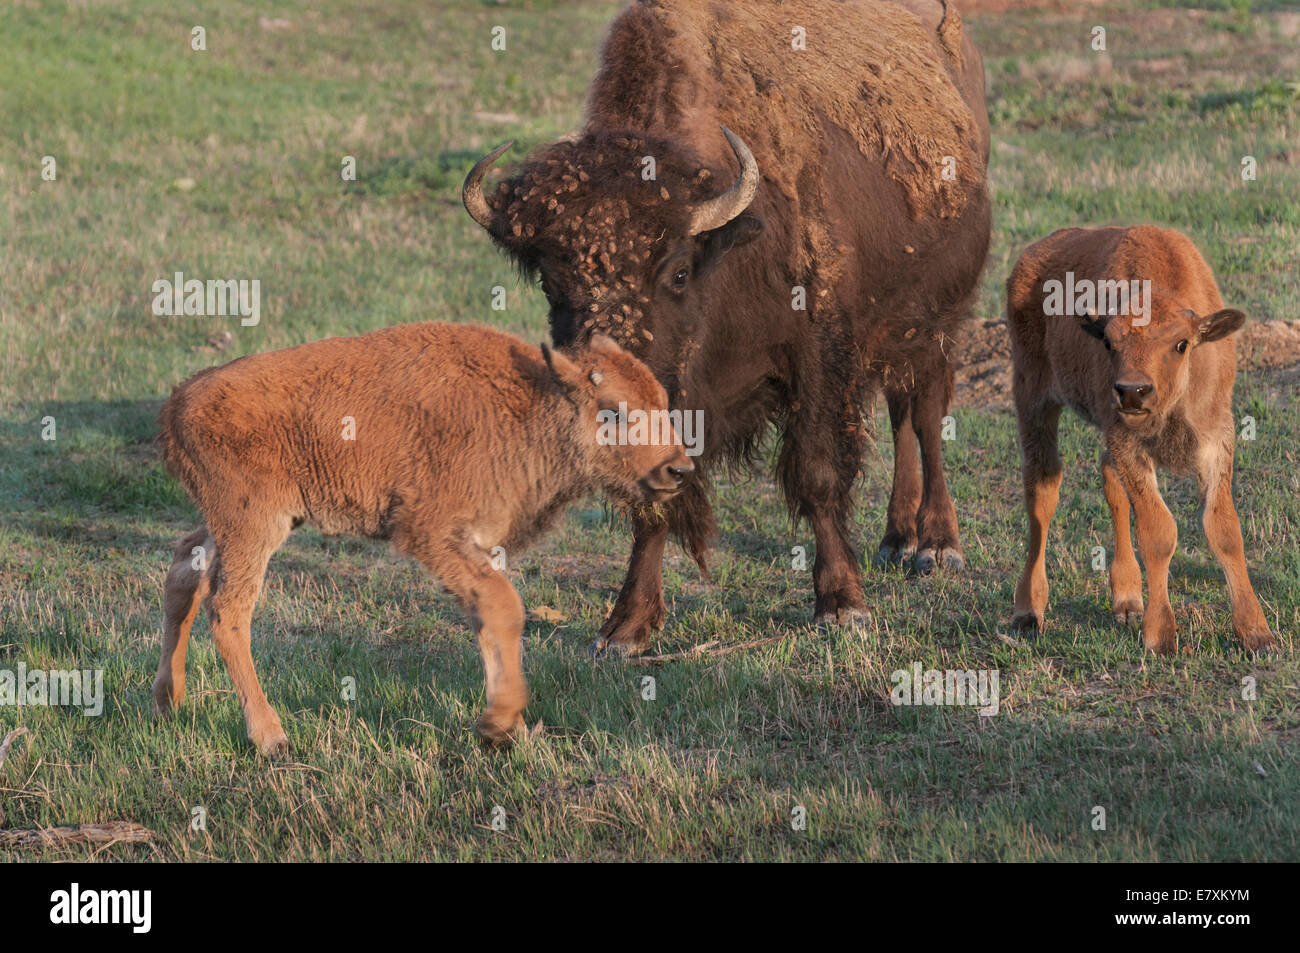 American Bison or American Buffalo (Bison bison) cow and calves Theodore Roosevelt National Park, North Dakota. Bison are the la Stock Photo